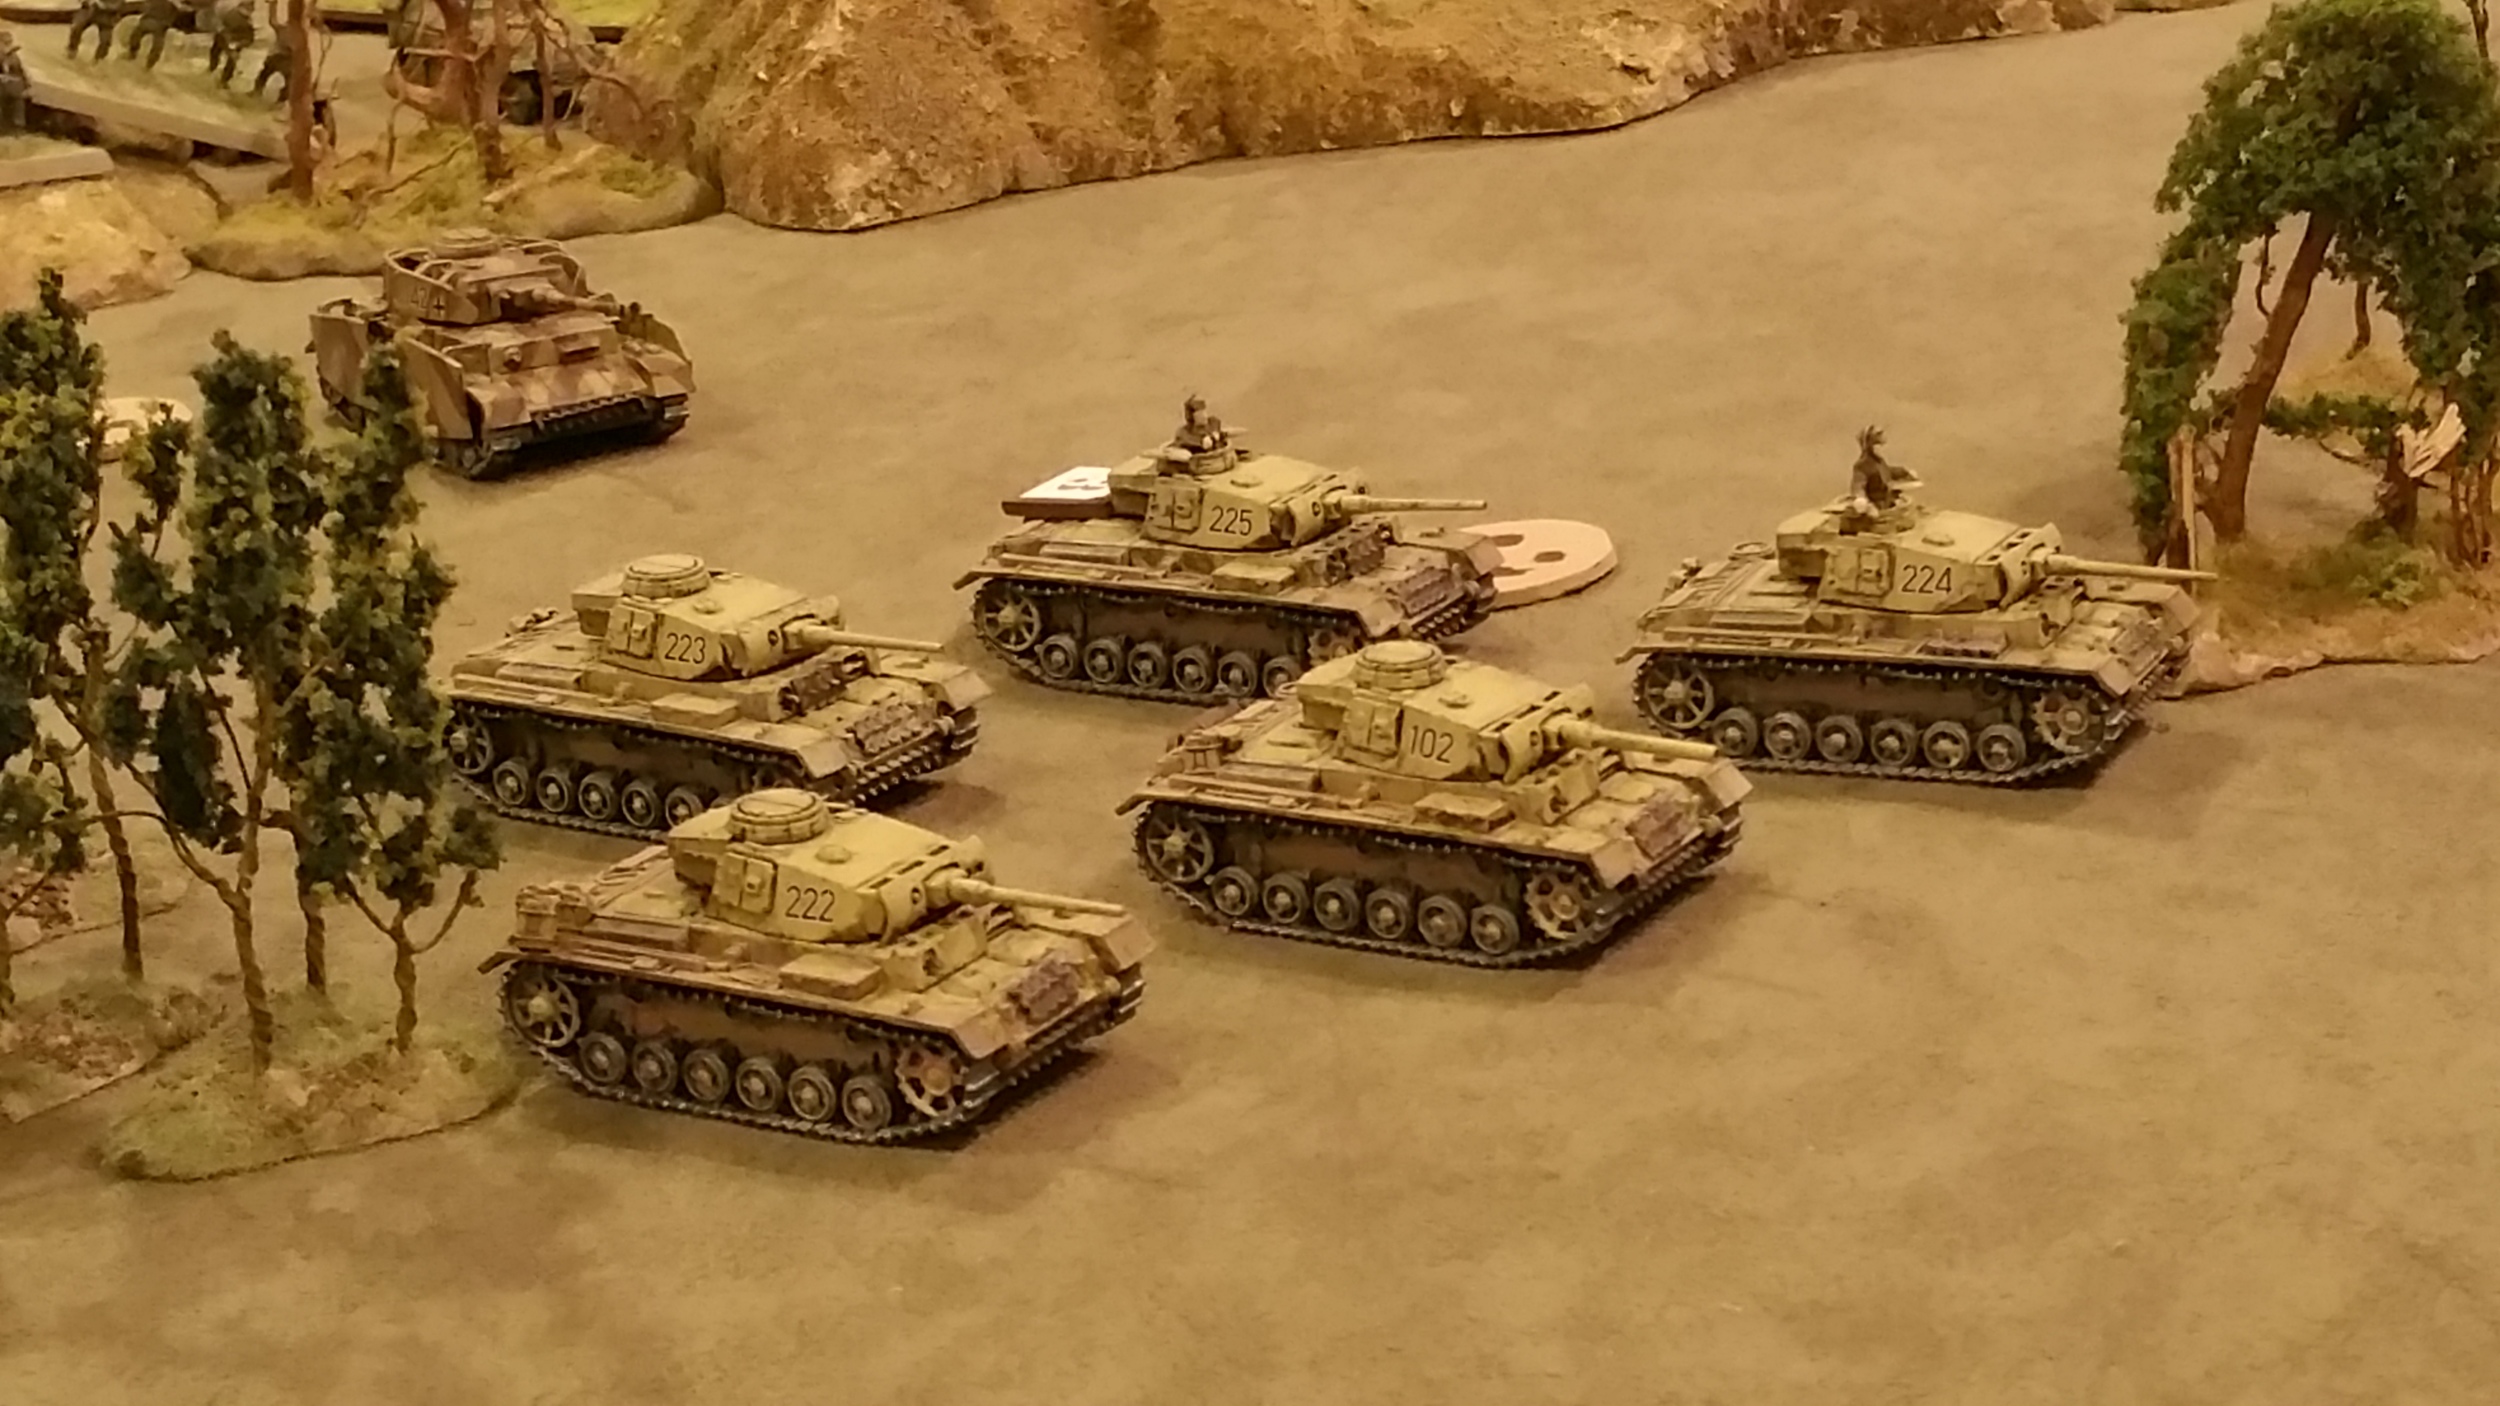 Panzers forward to the assault